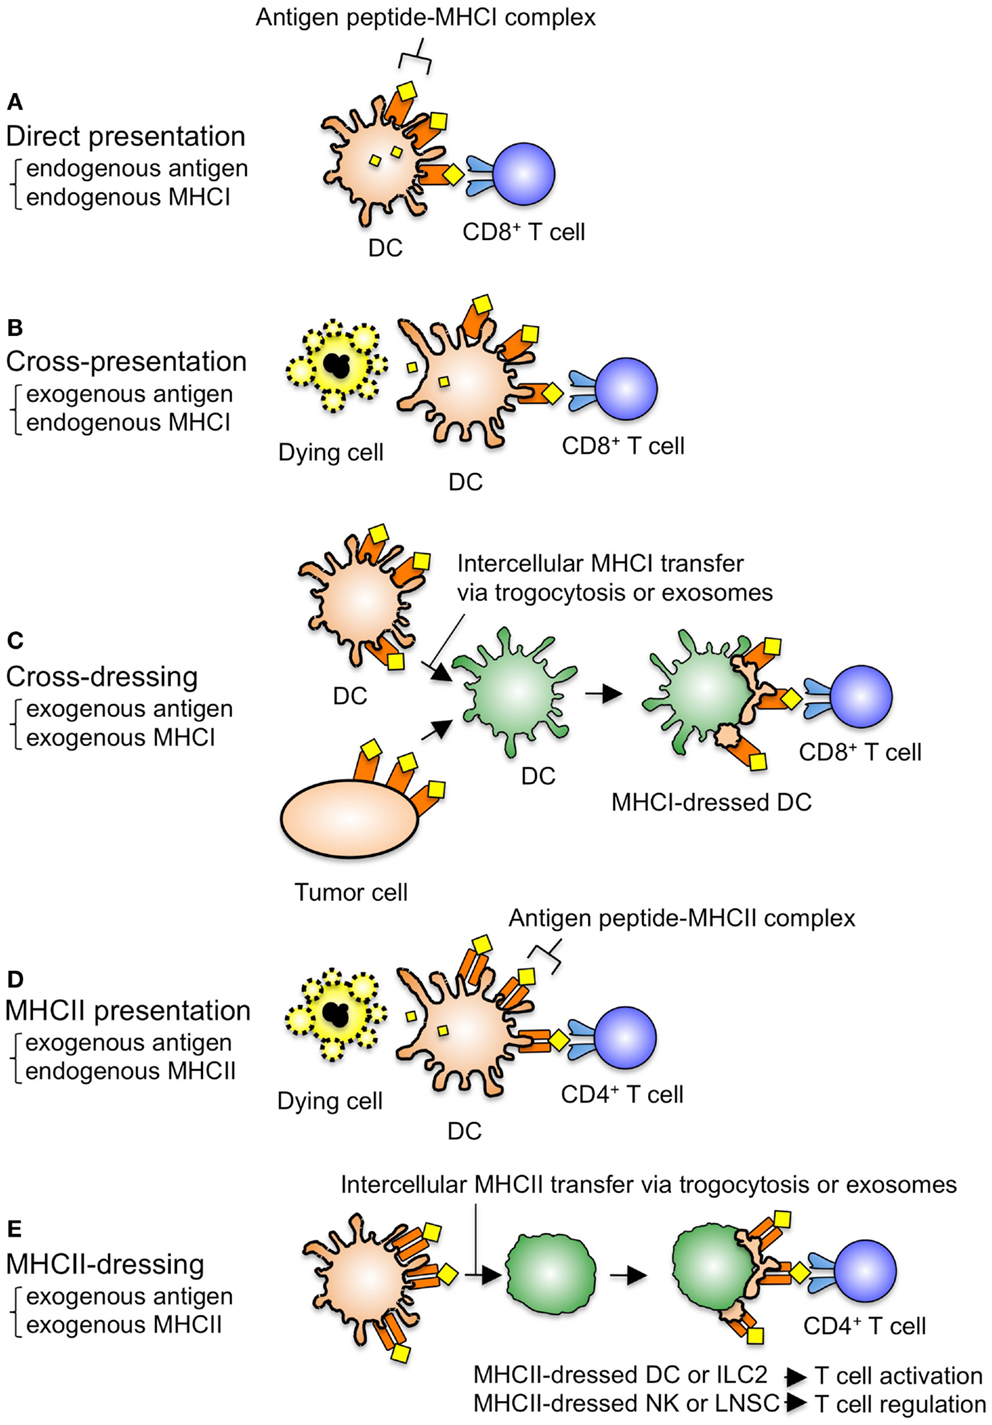 Frontiers | Antigen Presentation by MHC-Dressed Cells